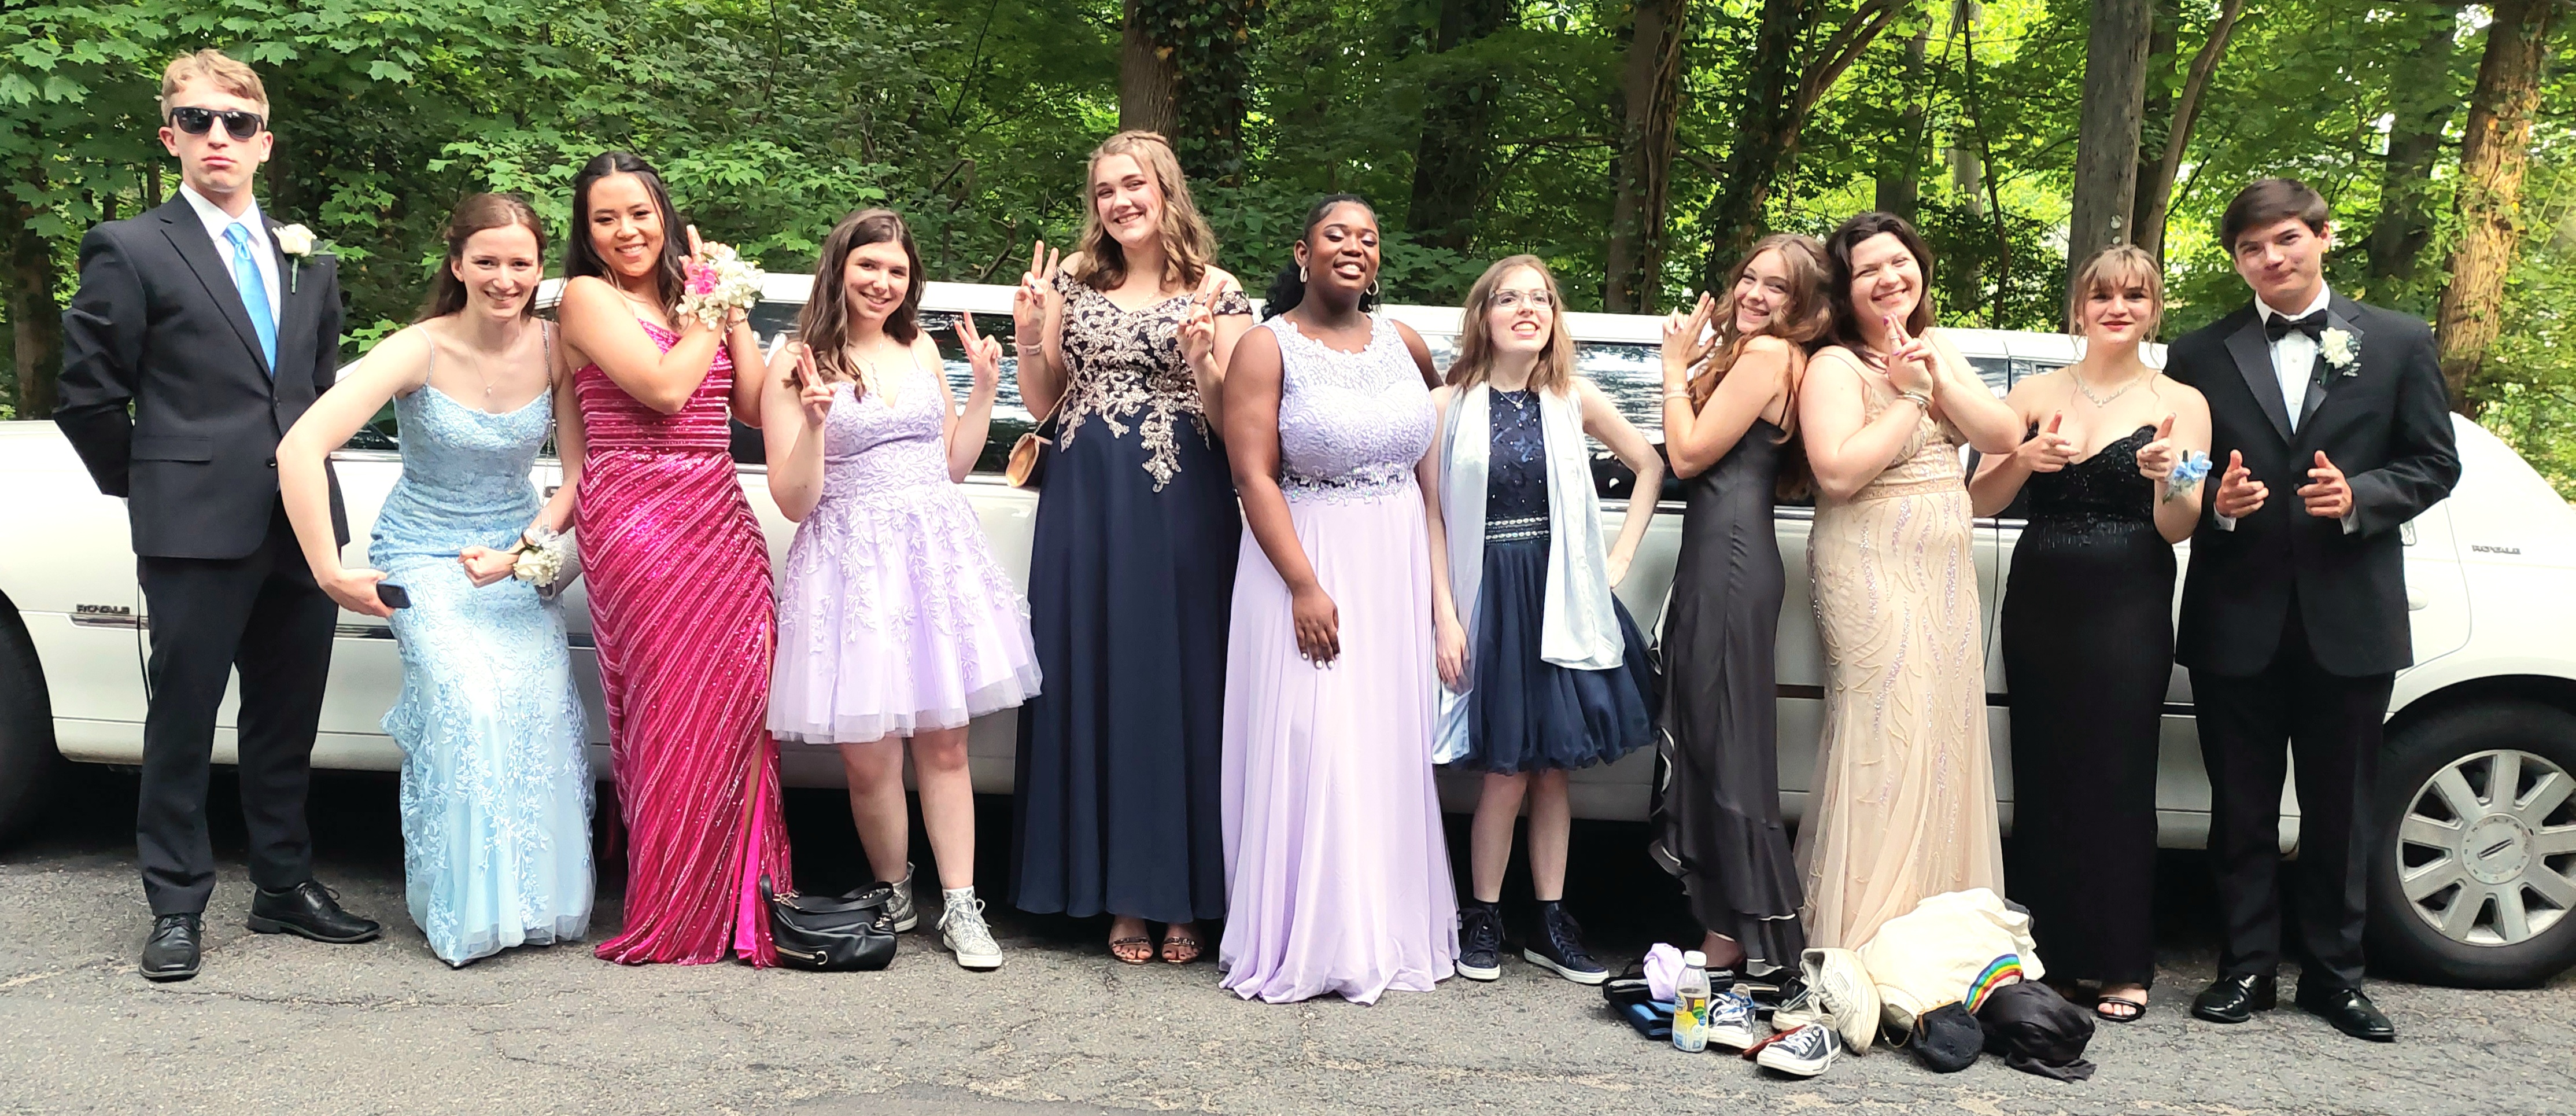 Show Biz Limousine The Best And Most Affordable Prom Limo Service in Long Island 